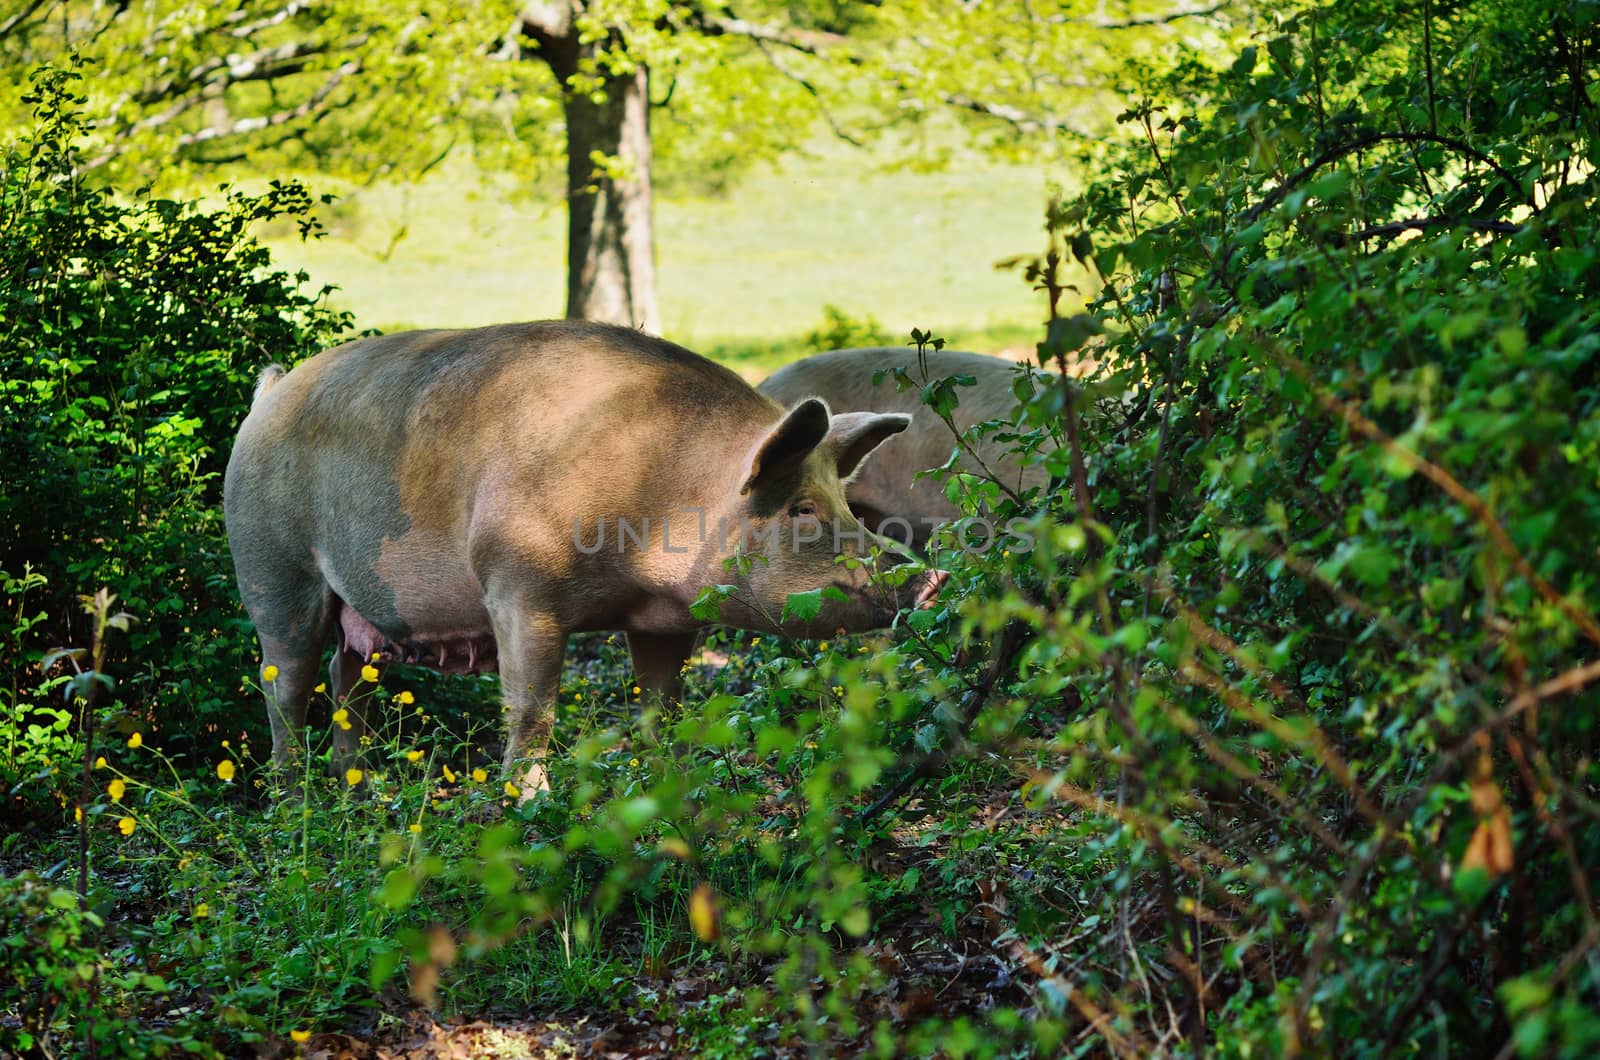 Pig in the thicket green bushes. Mountain forest, Italy